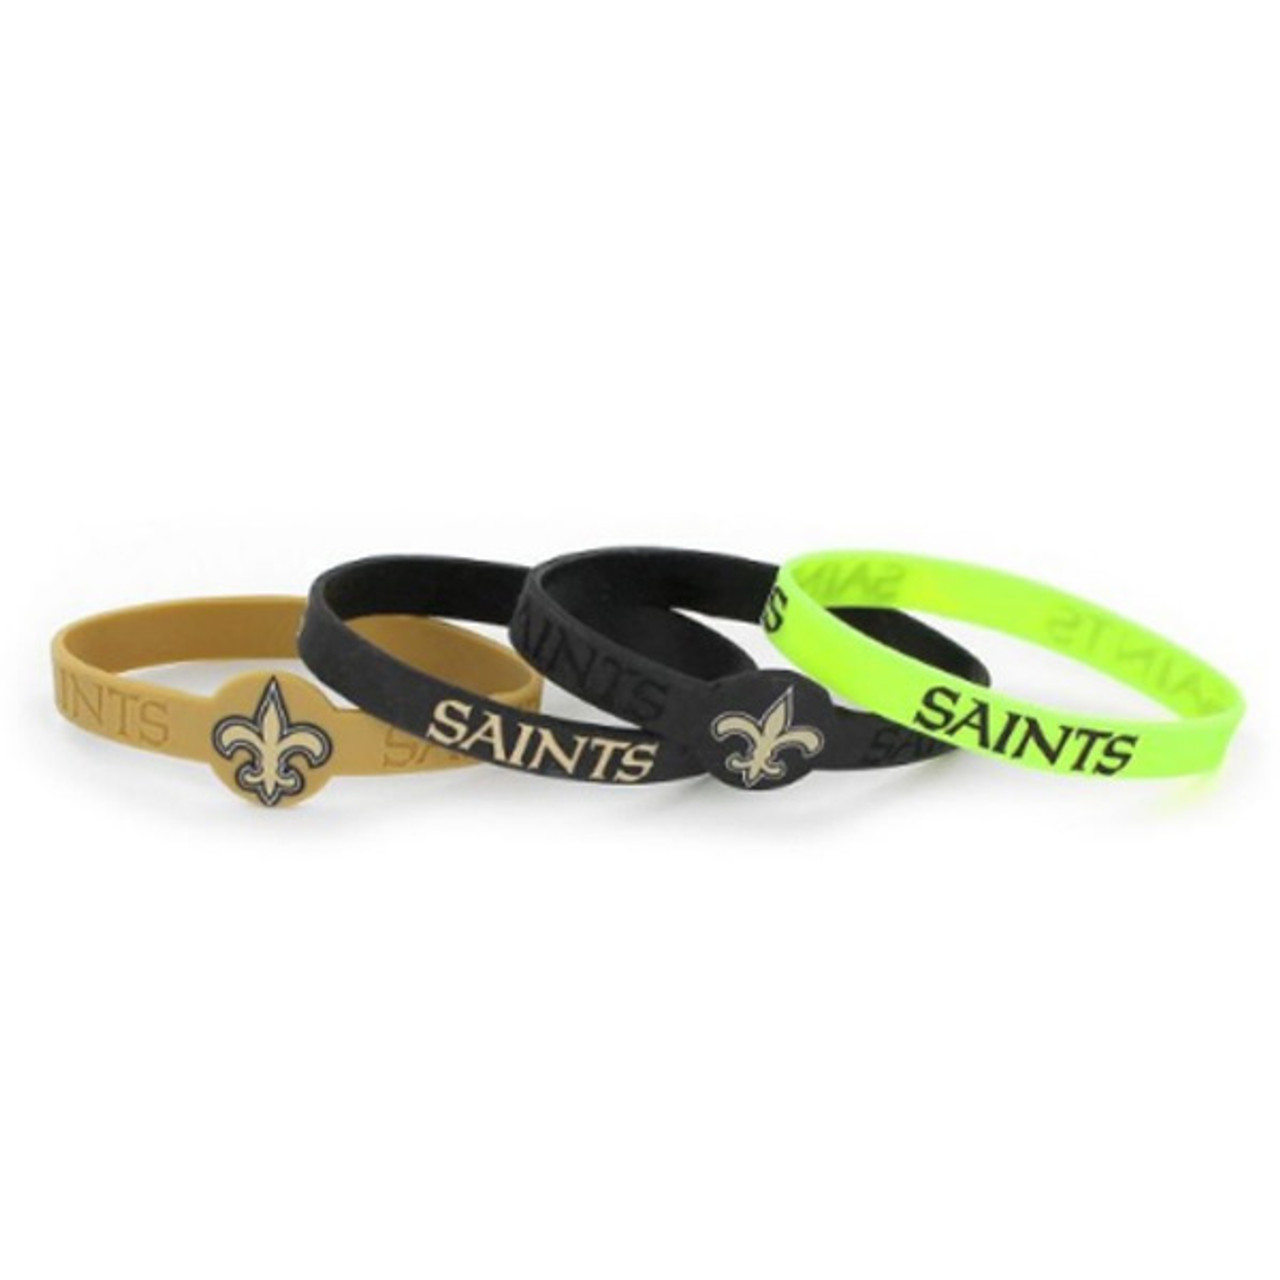 West Virginia Wide Wristbands (2 Pack)